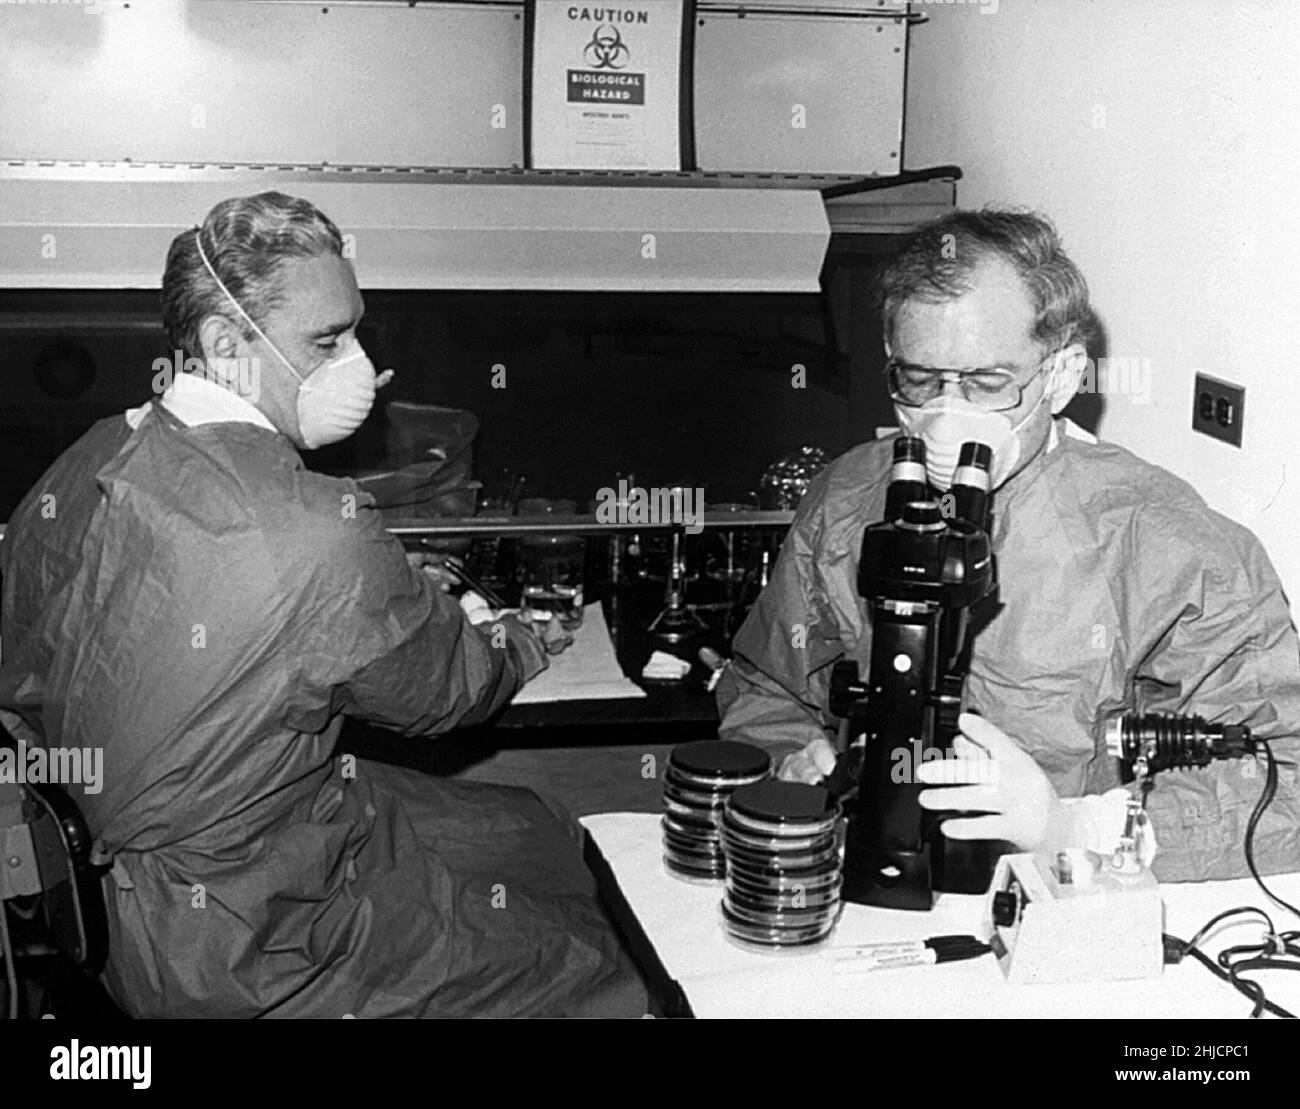 Scientists George Gorman (left) and Jim Feeley in 1978, examining culture plates on which the first environmental isolates of Legionella pneumophila had been grown. The causative agent of Legionnaires' disease, this bacteria was discovered when it became responsible for an outbreak at a Philadelphia convention of the American Legion in 1976. Stock Photo